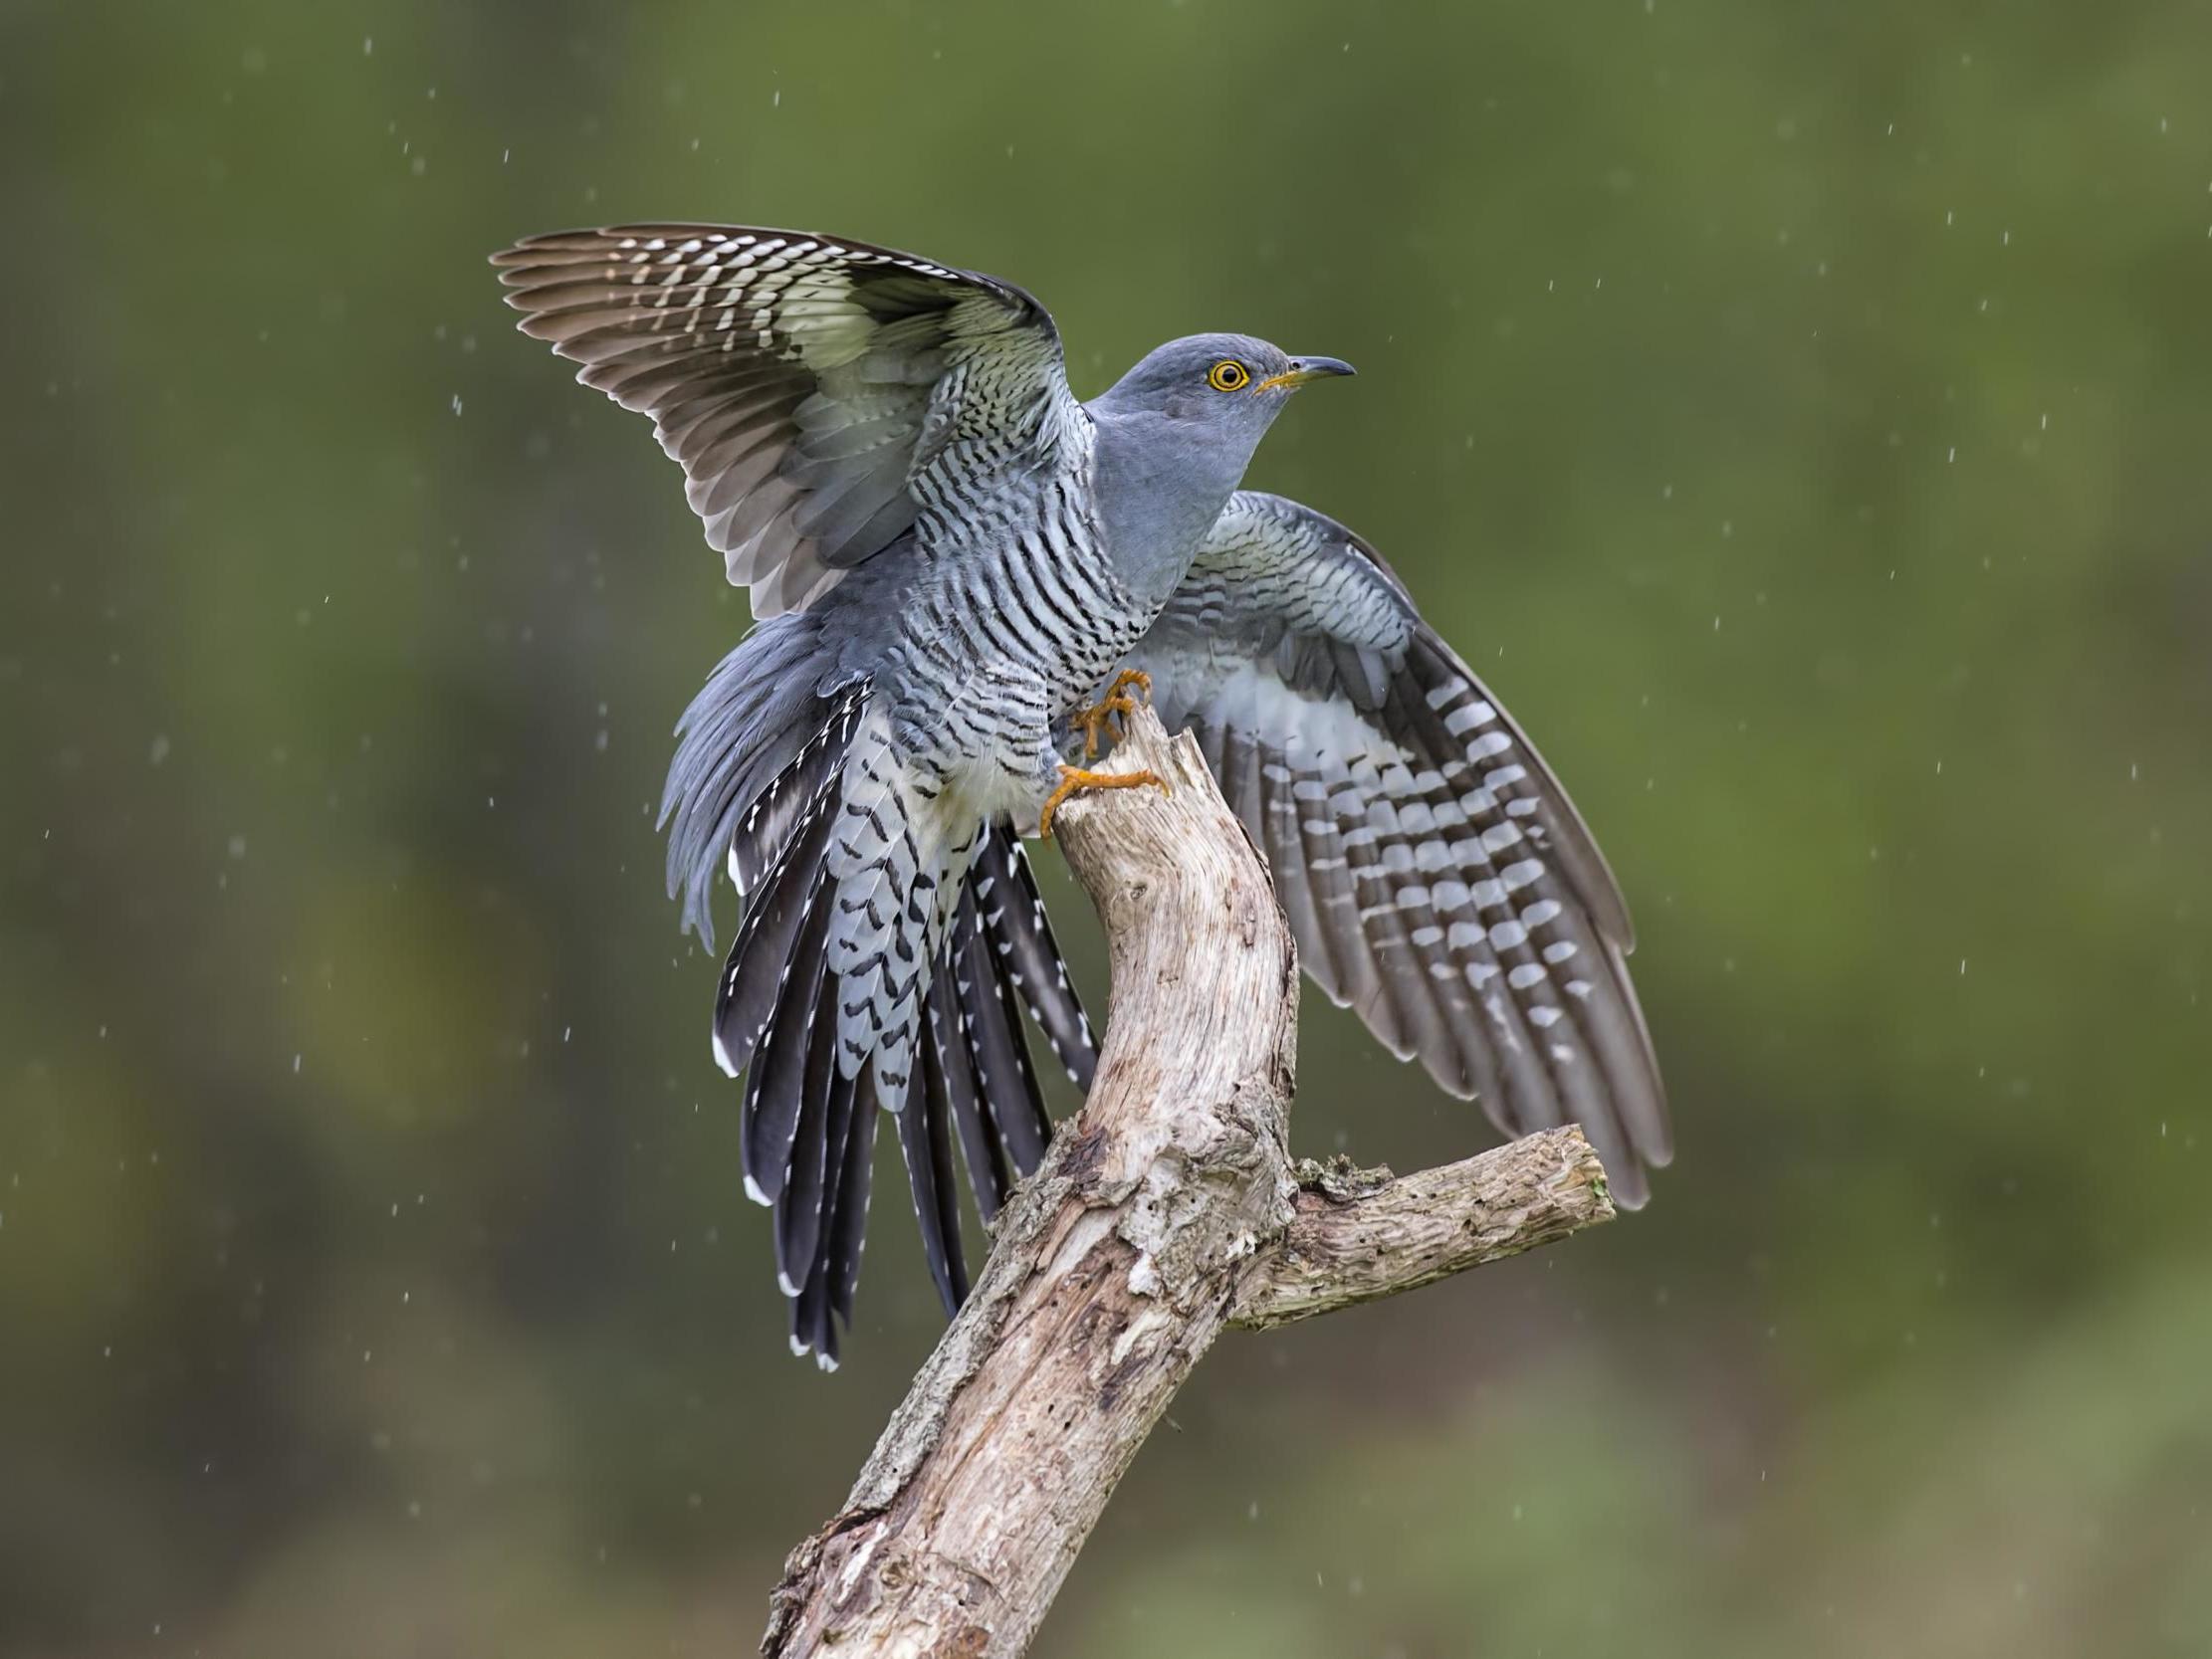 A cuckoo lands on a branch in the rain